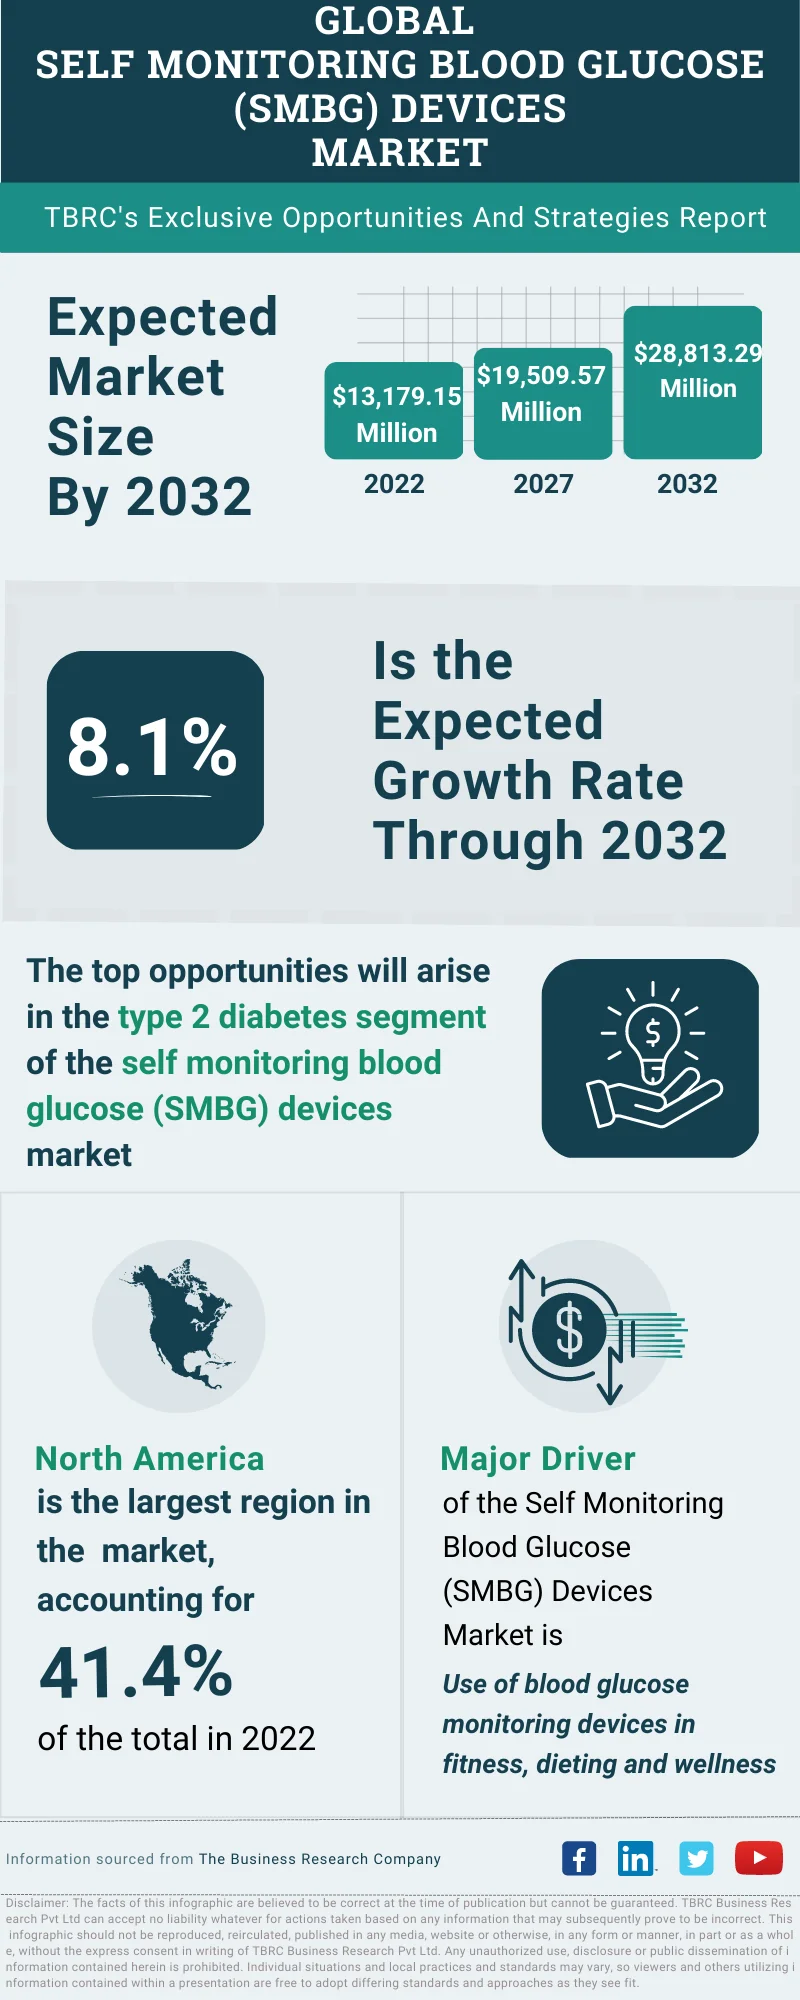 Self Monitoring Blood Glucose (SMBG) Devices Global Market Opportunities And Strategies To 2032